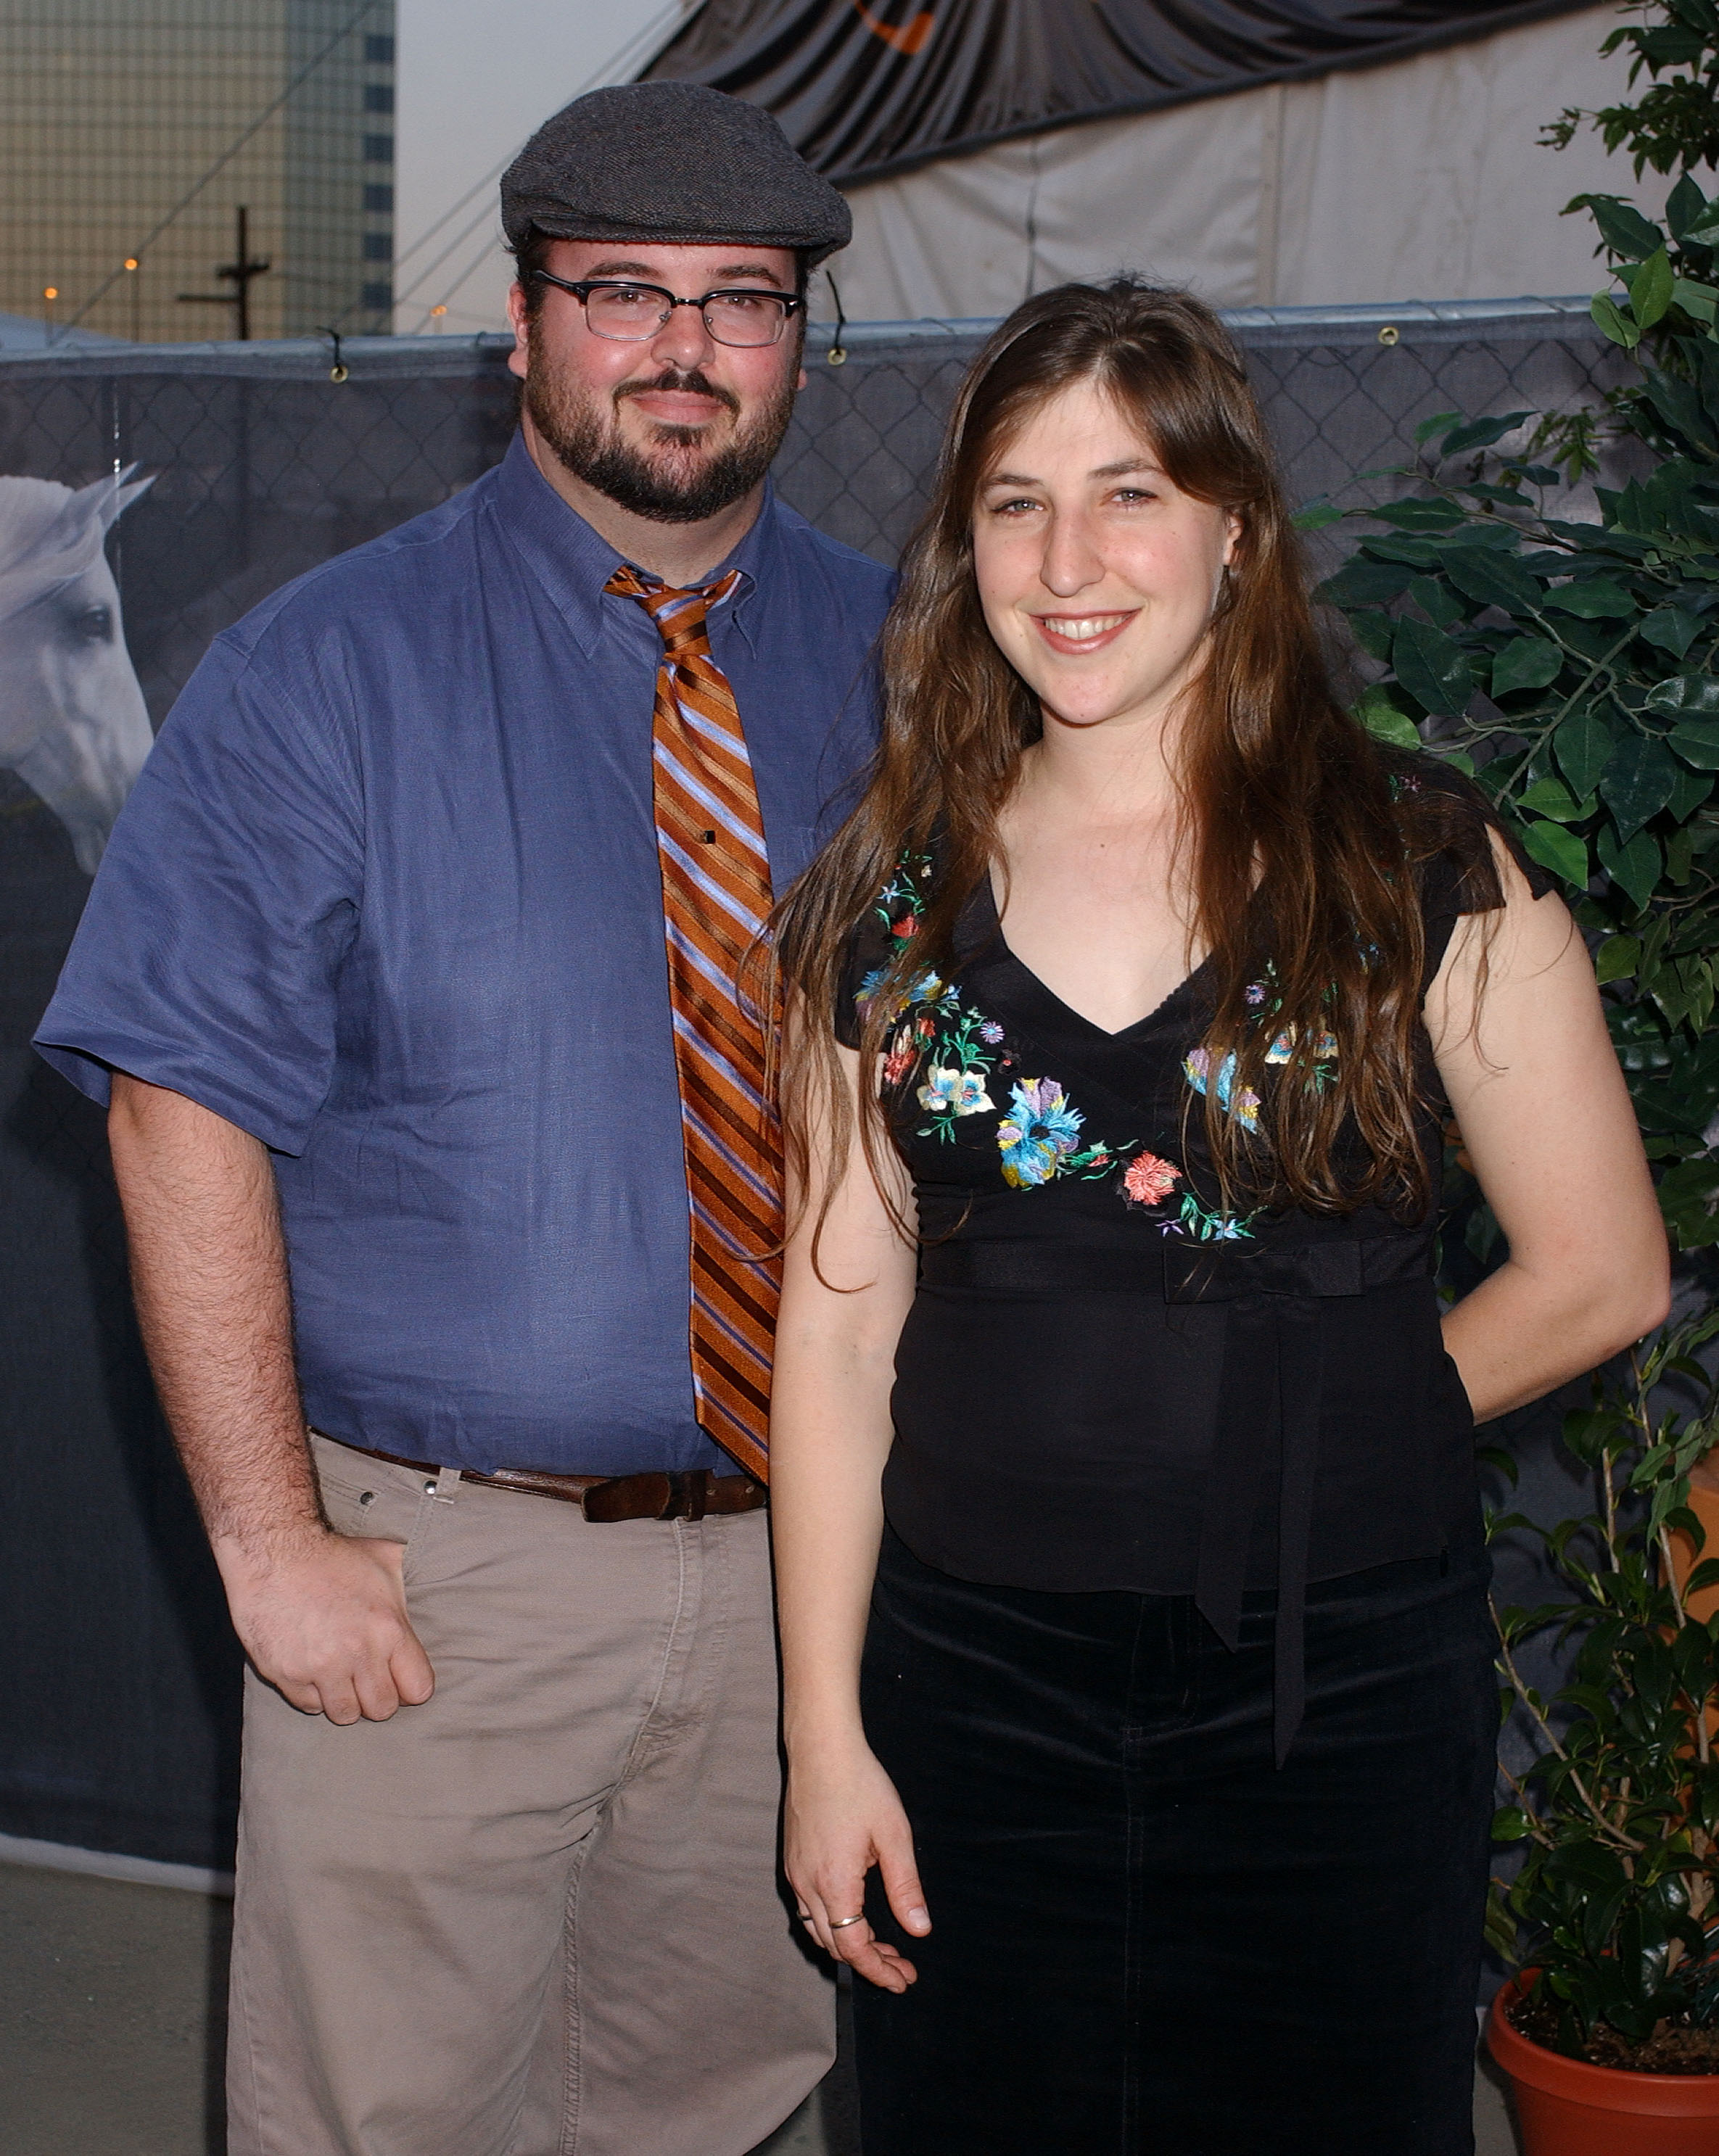 Mayim Bialik and Michael Stone attend the opening night of "Cavalia" in Glendale, California | Source: Getty Images